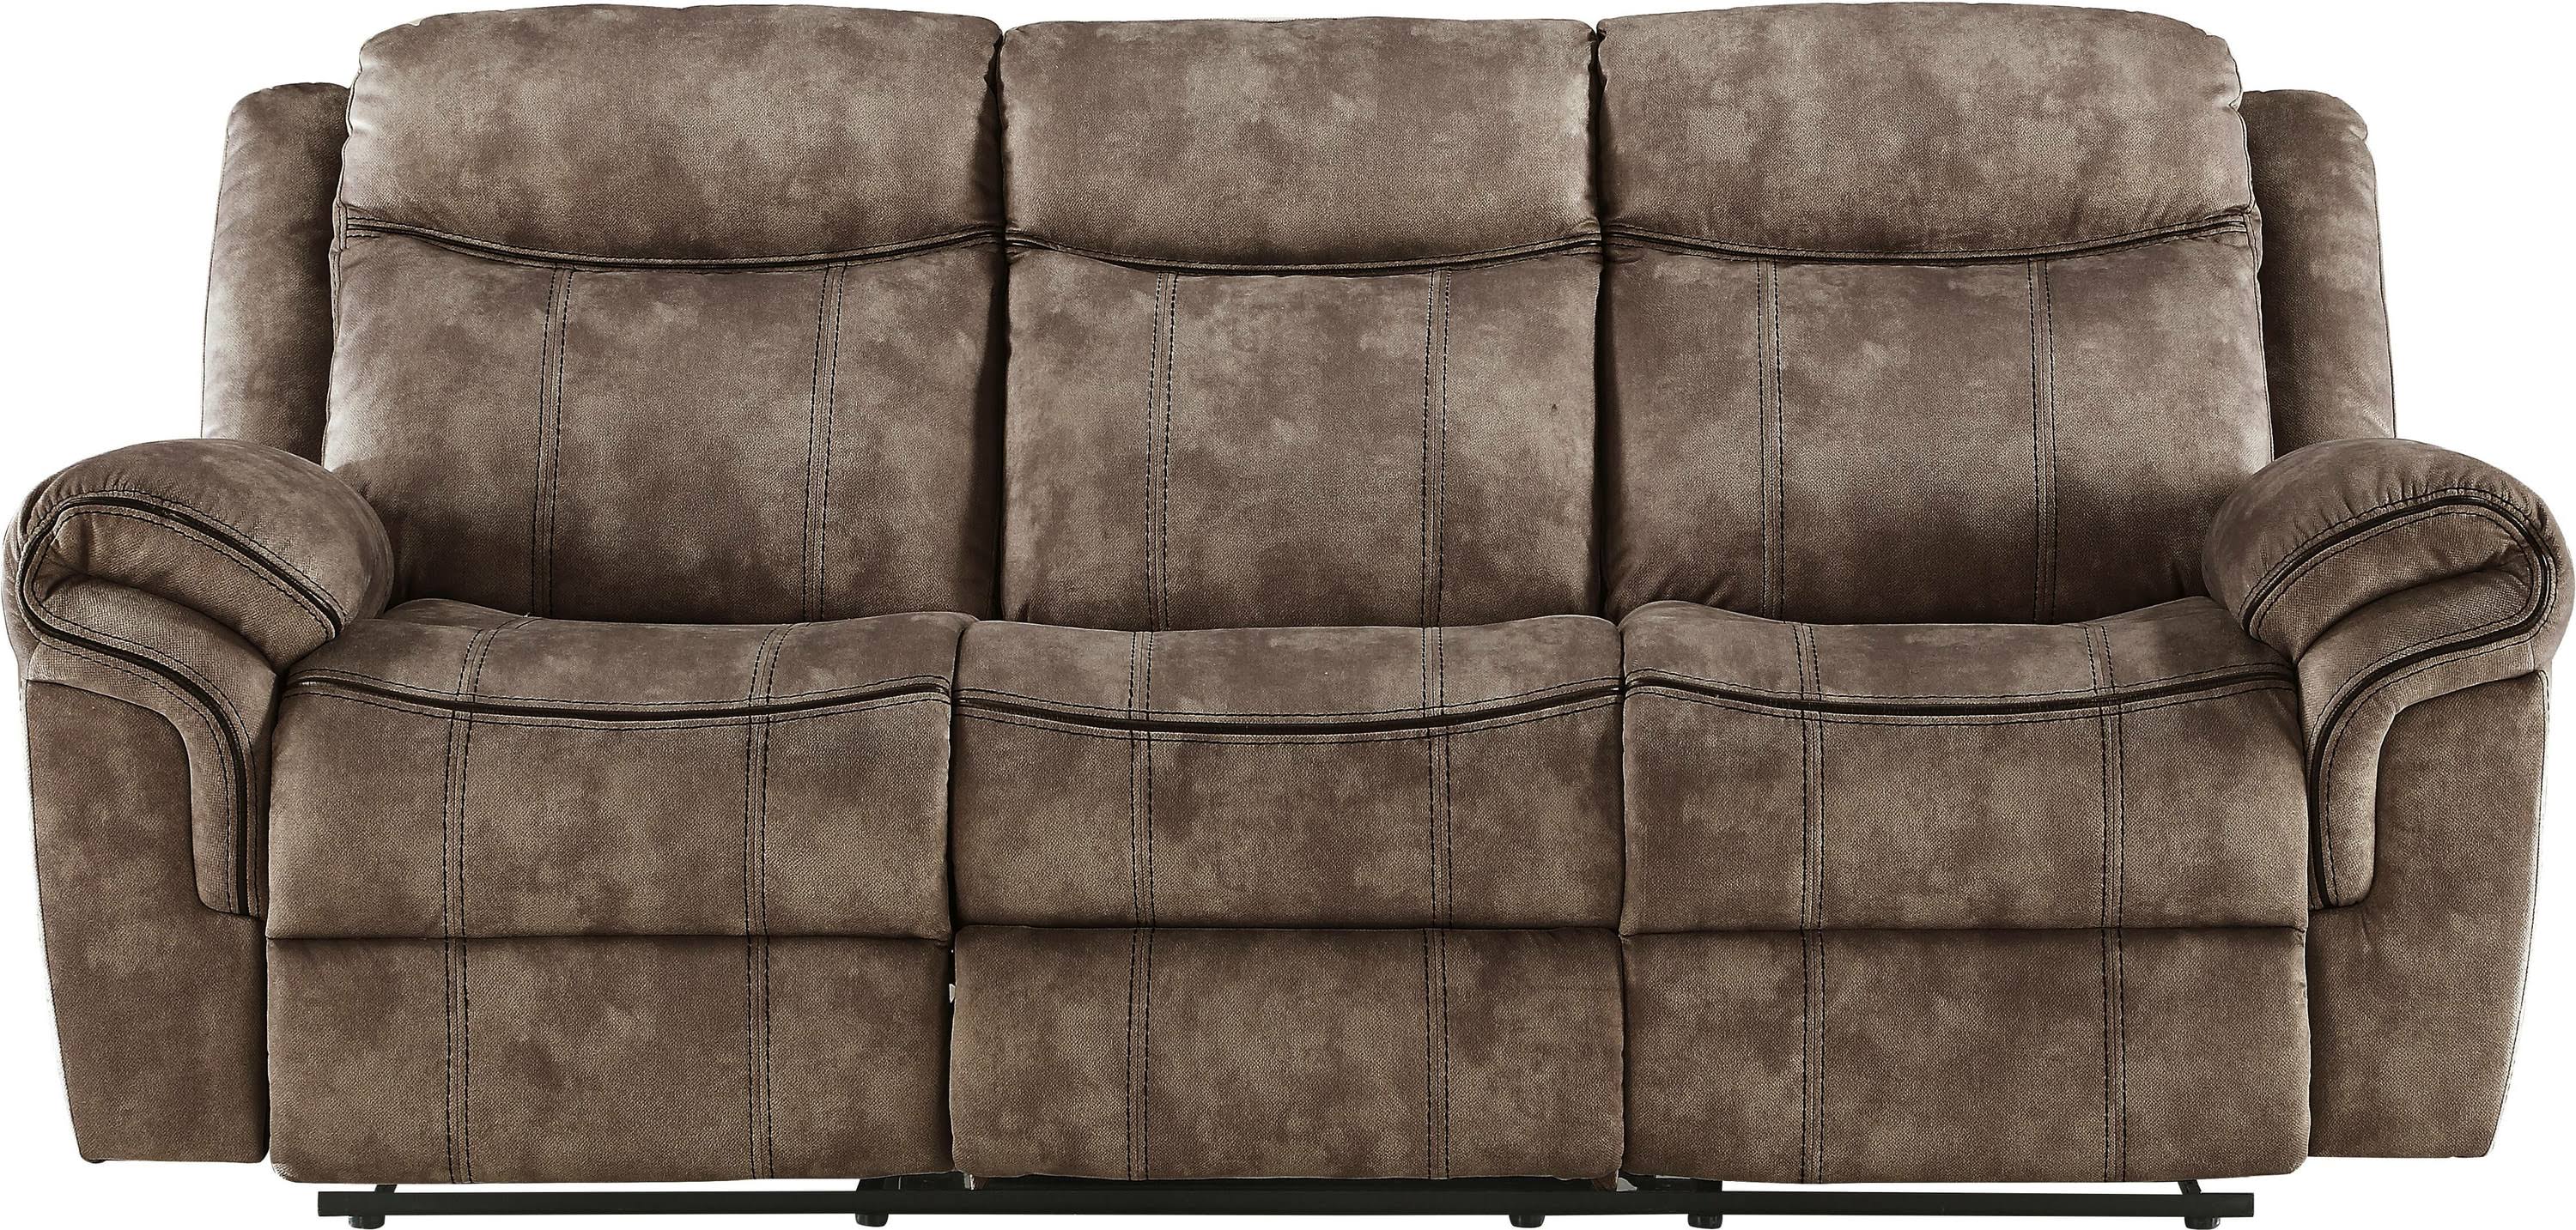 Two Tone Chocolate Reclining Sofa Front